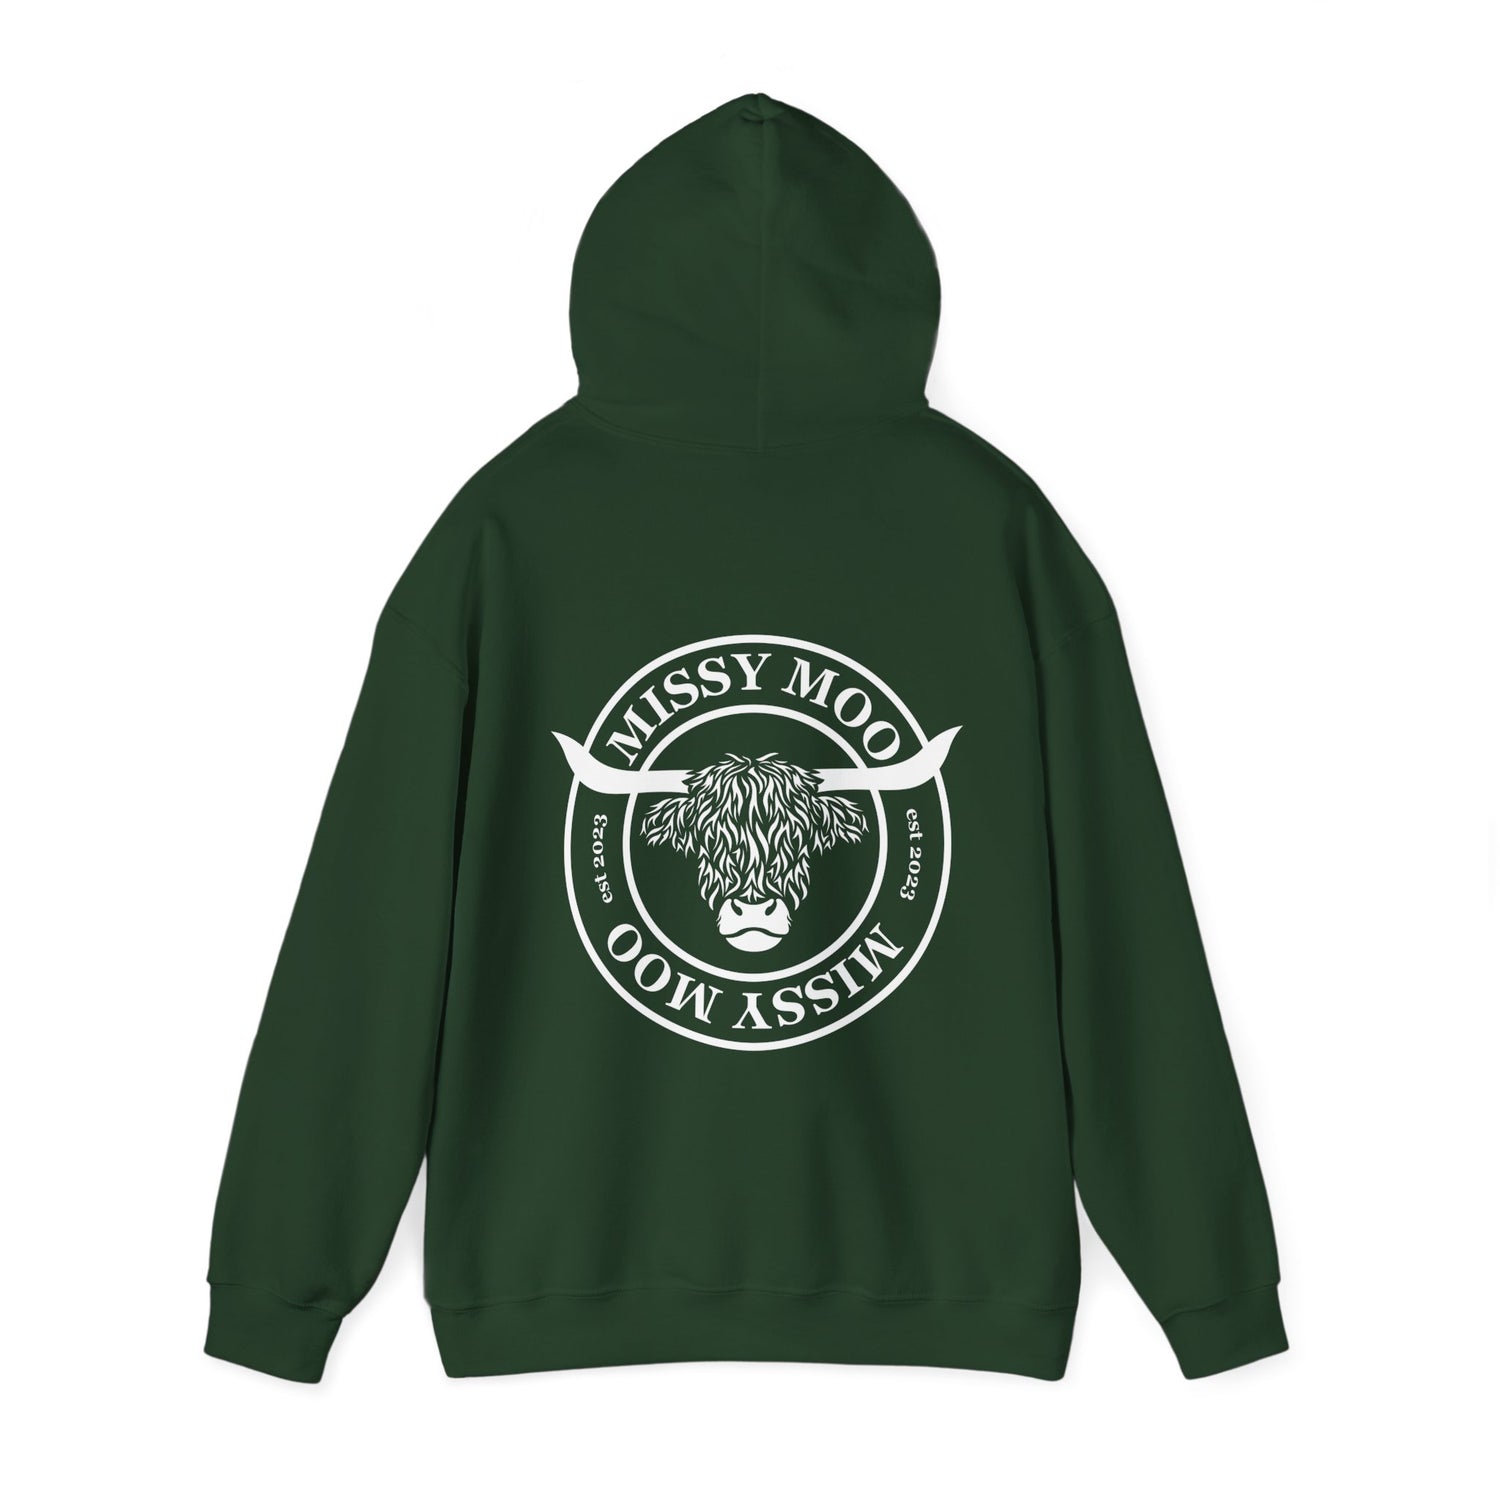 Signature Mens Hoodie - Forest Green